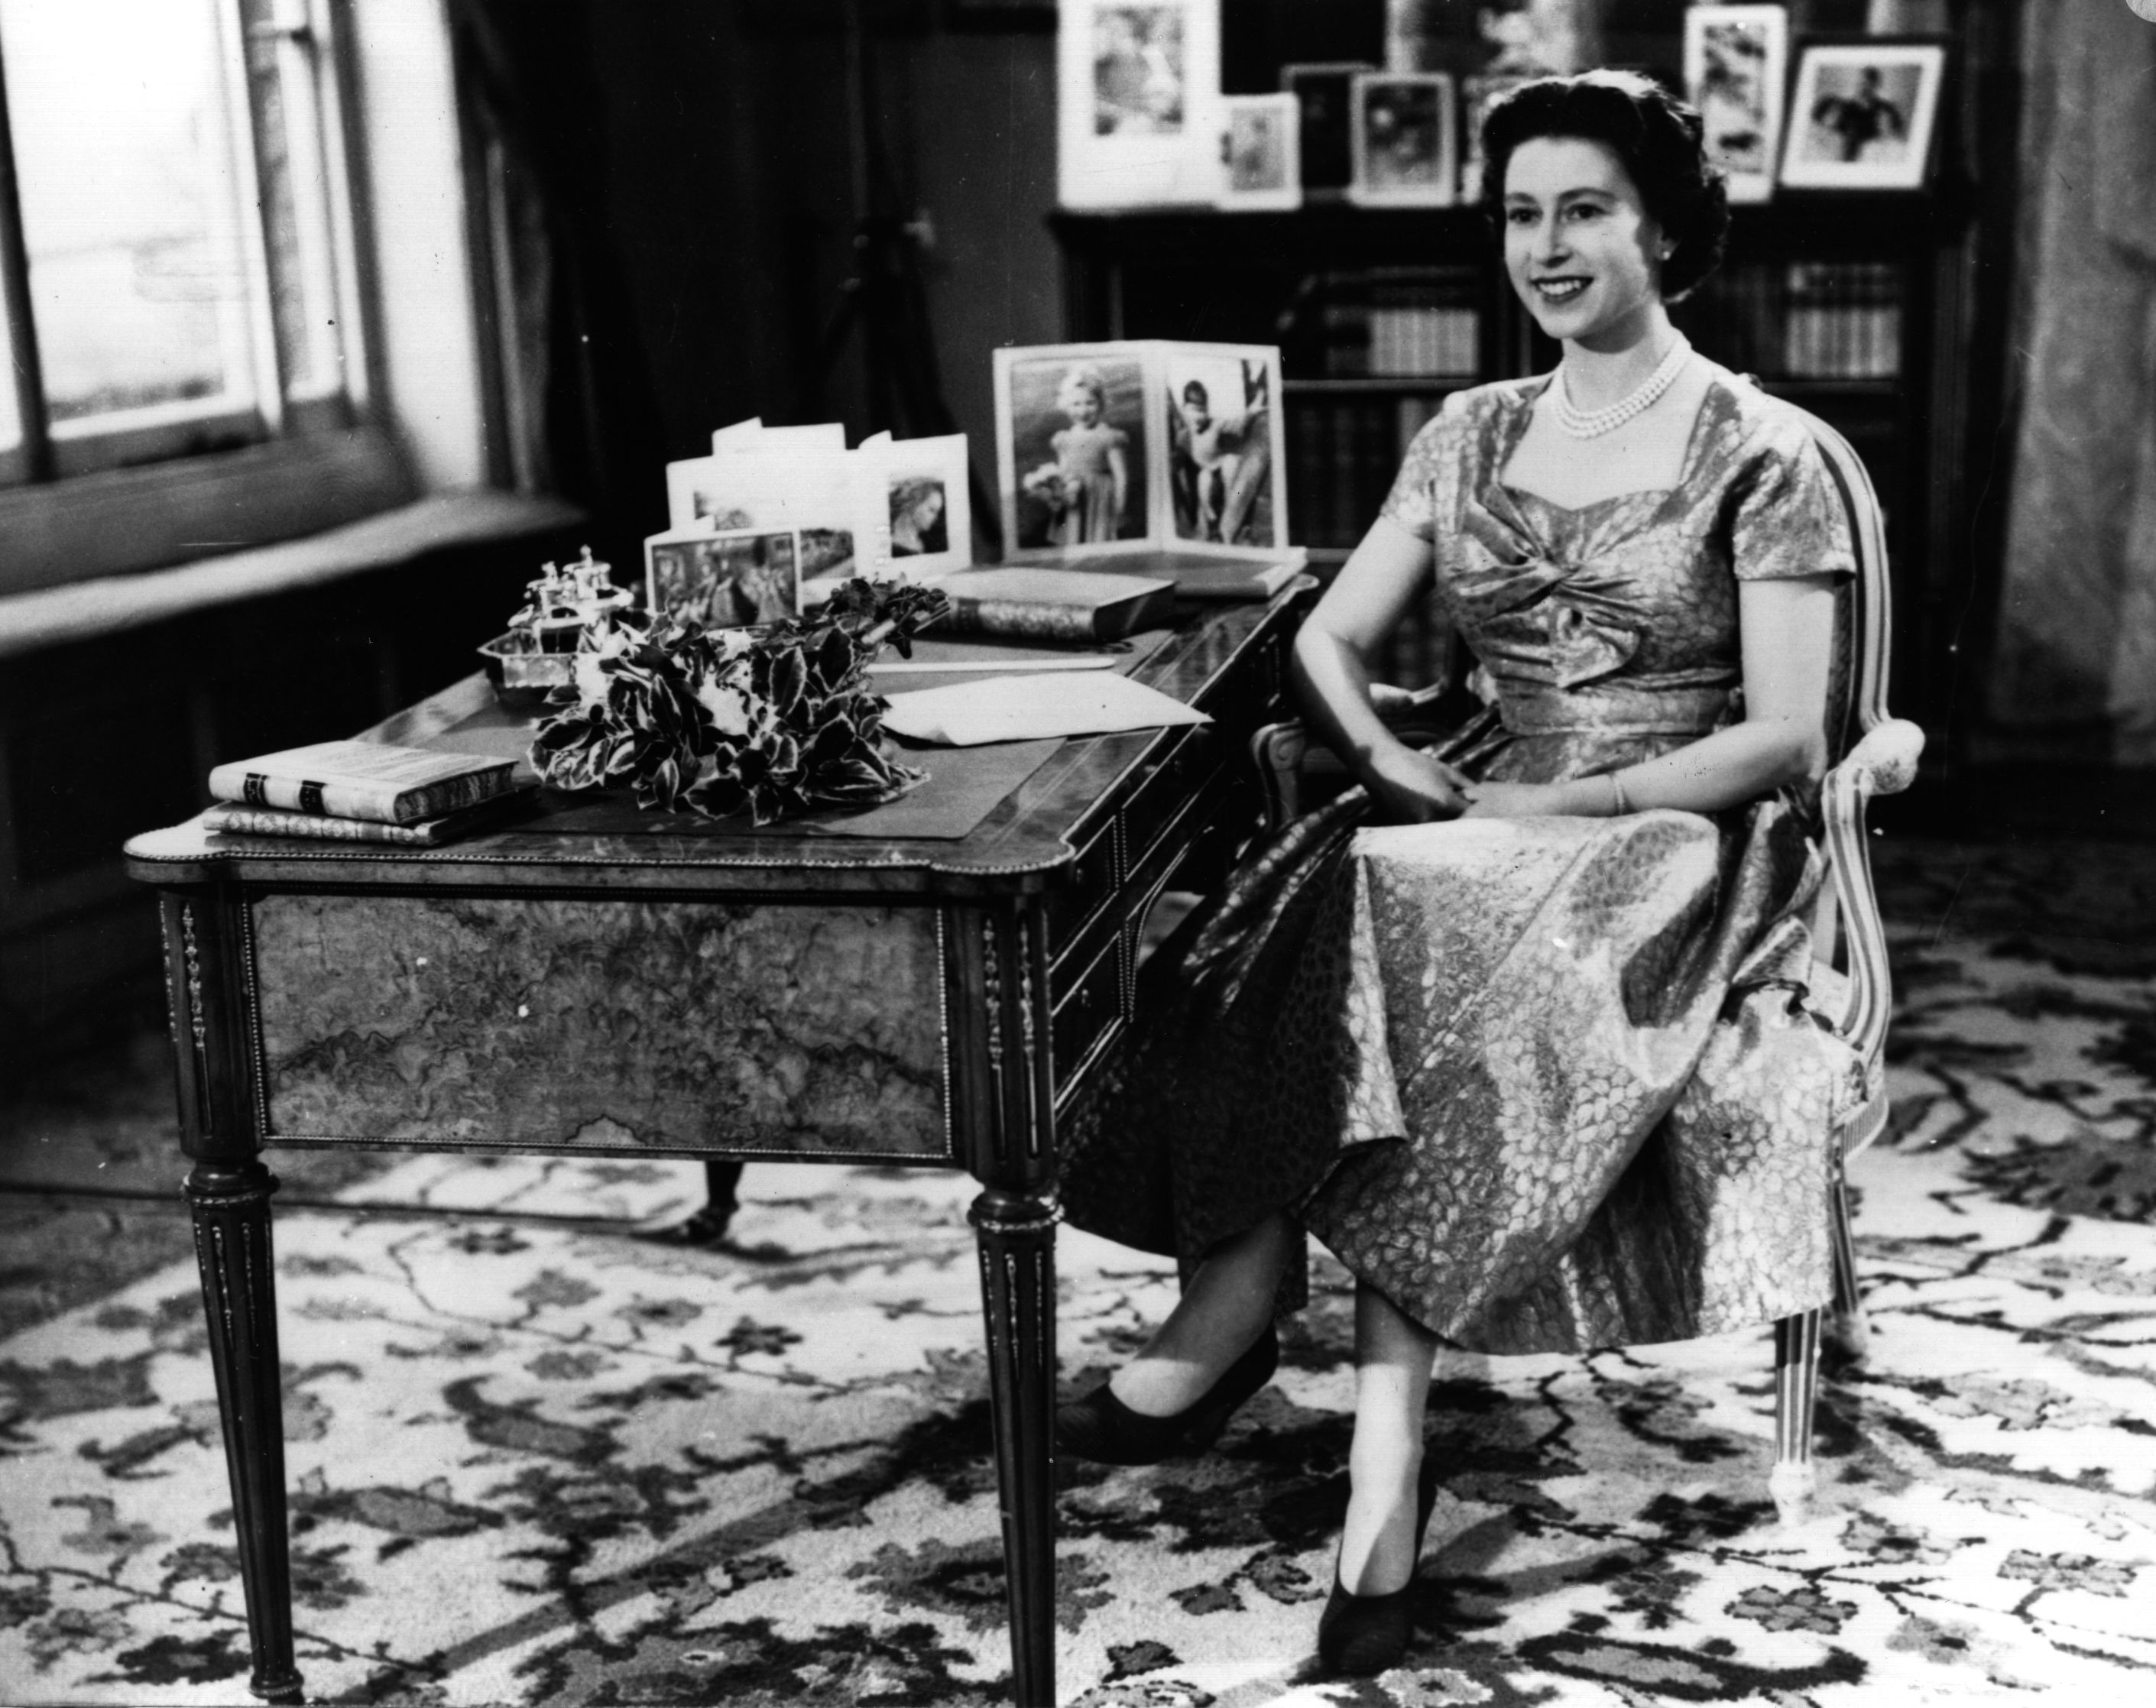 Queen Elizabeth II smiling during her first Christmas Day television speech to the nation in 1957